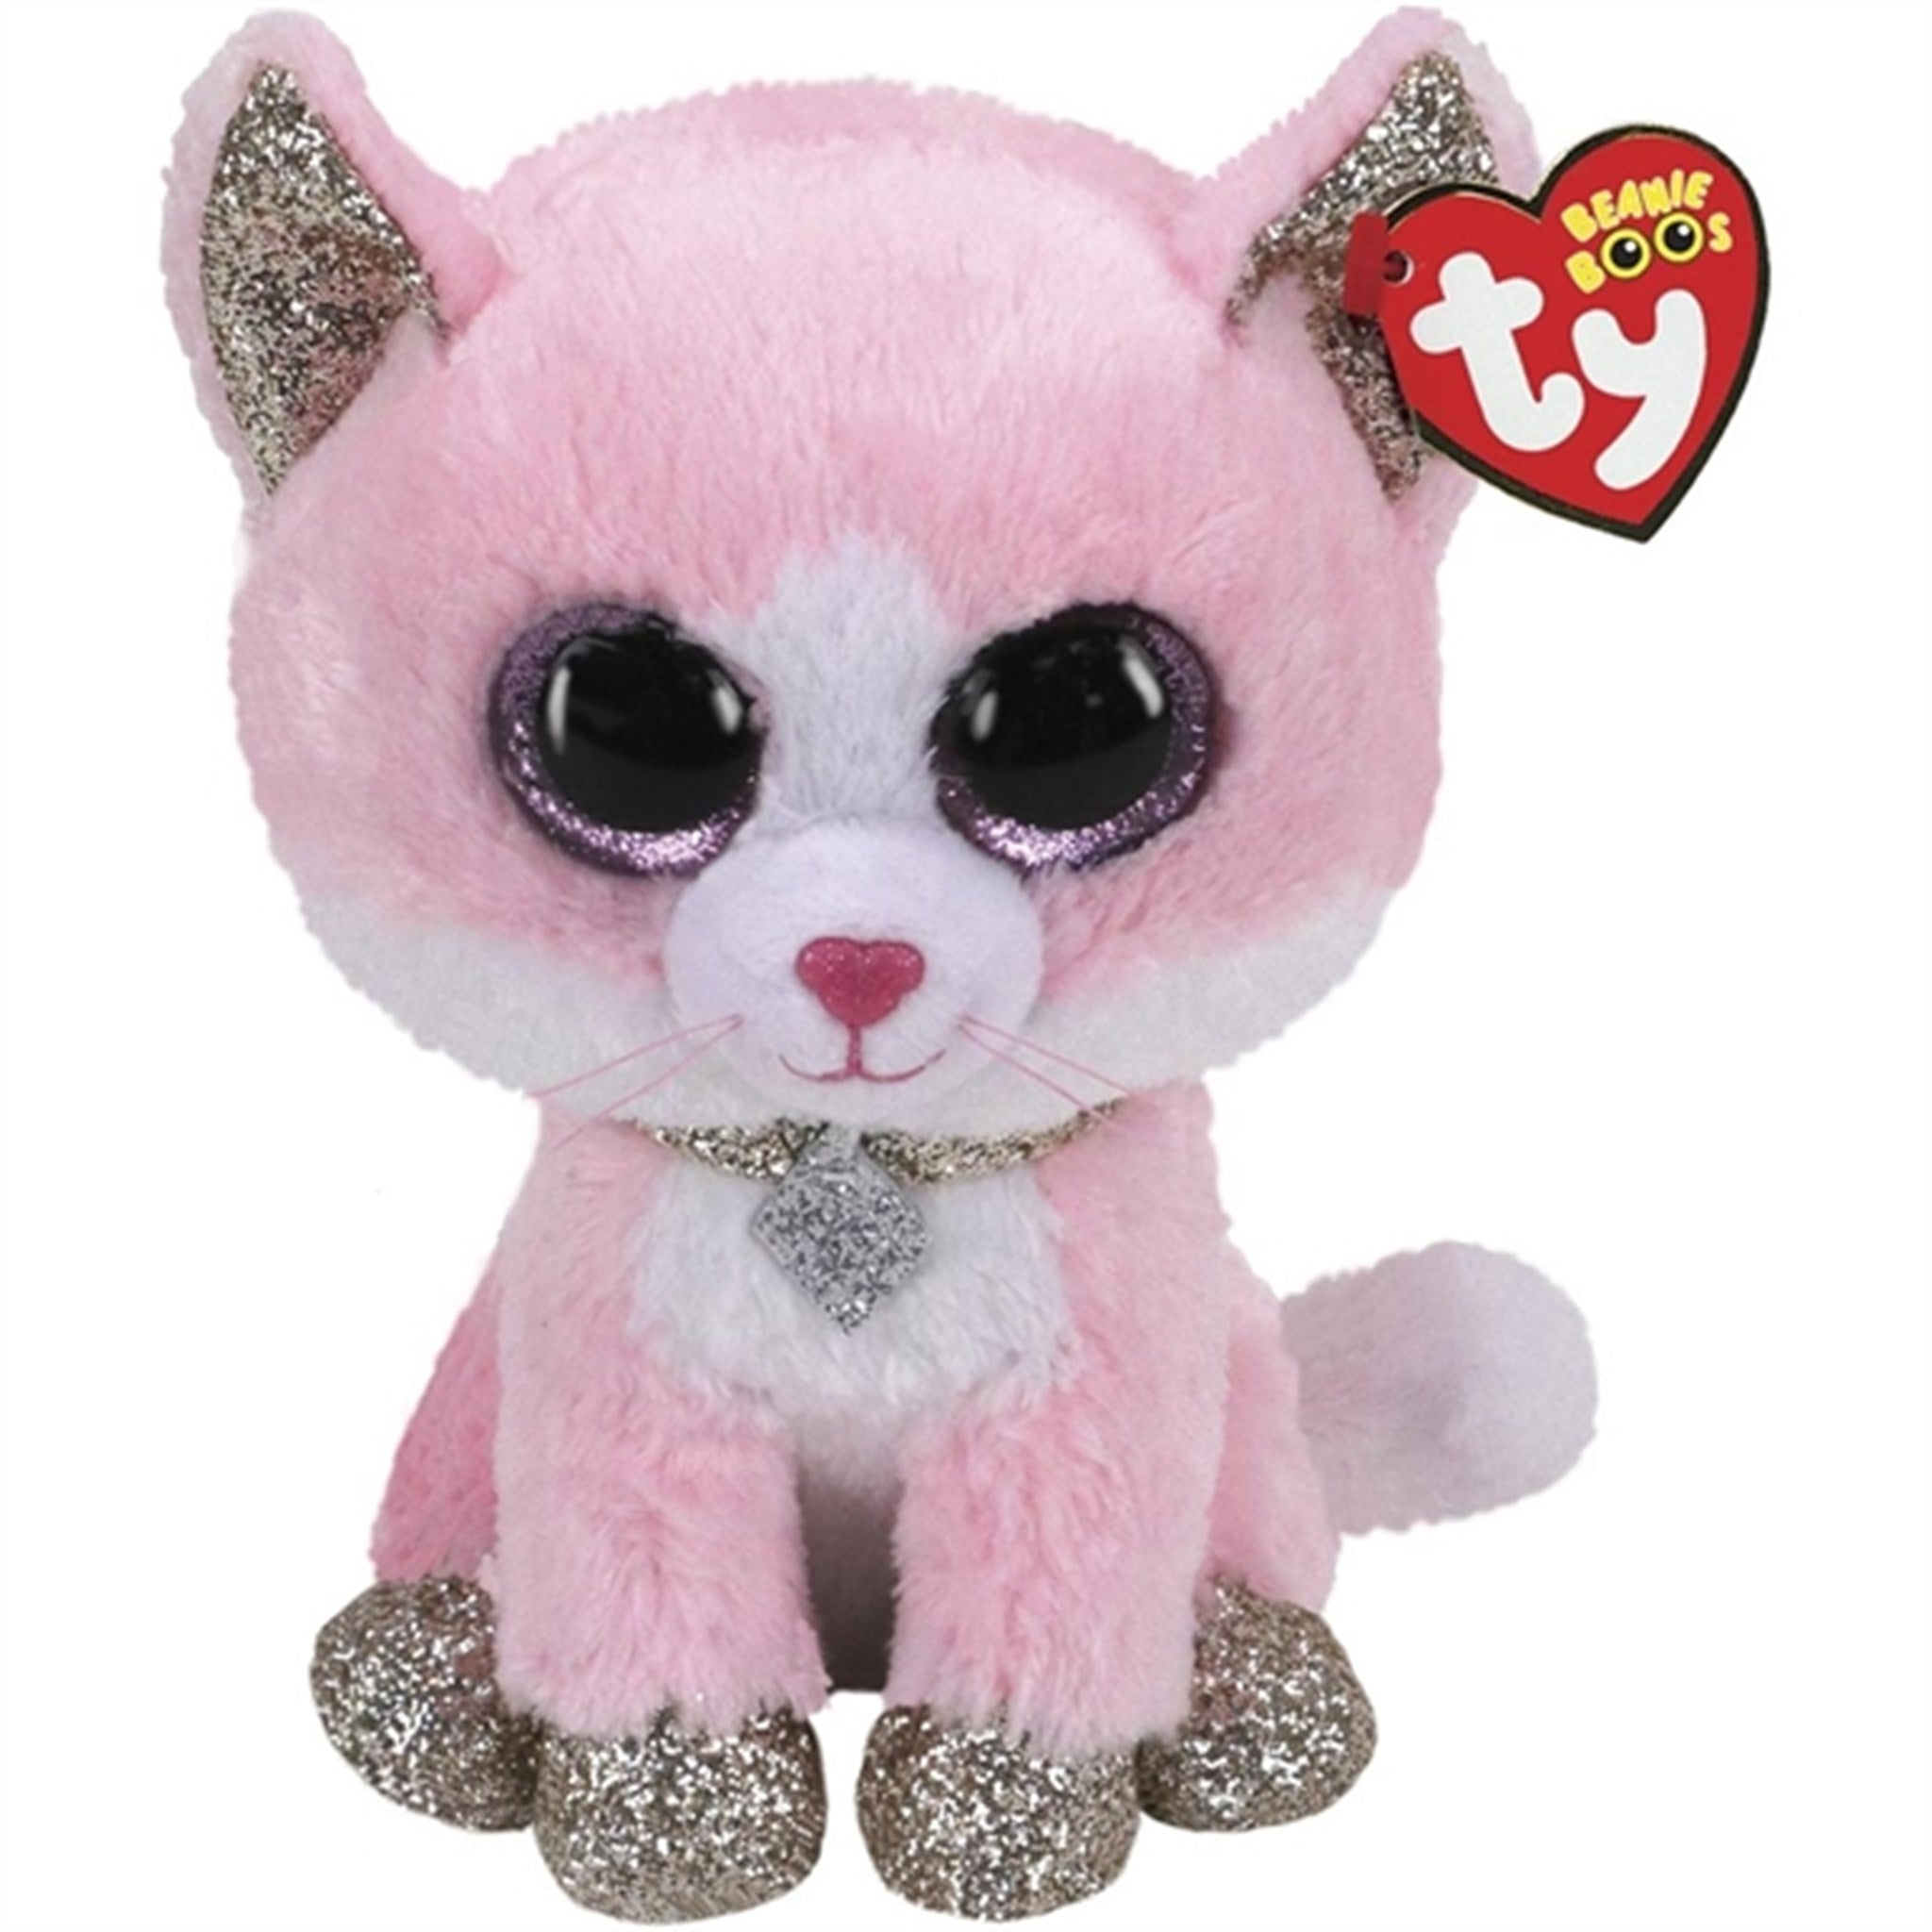 TY Beanie Boos Fiona - Pink Kat Med